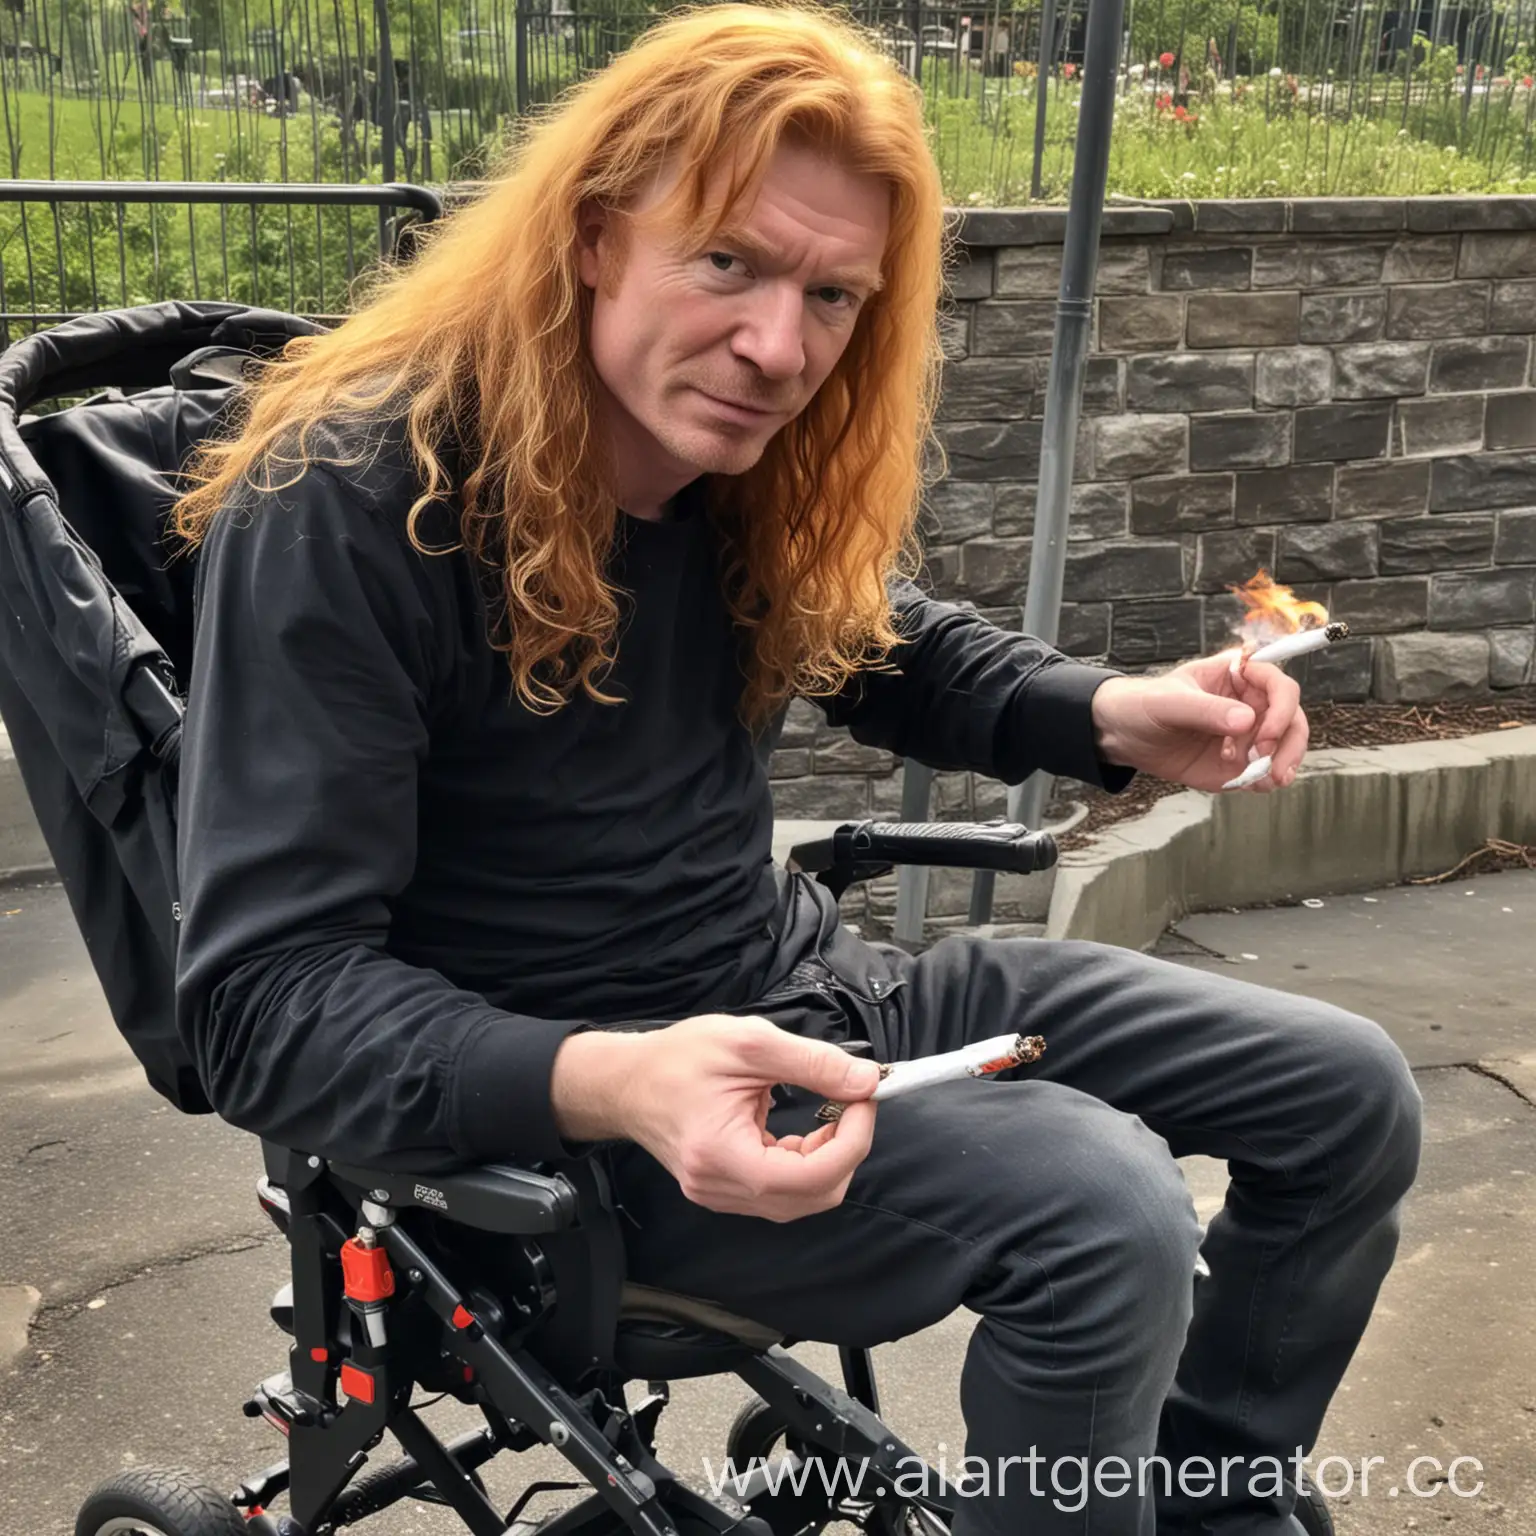 Dave-Mustaine-Disposes-of-Cigarette-Near-Baby-Stroller